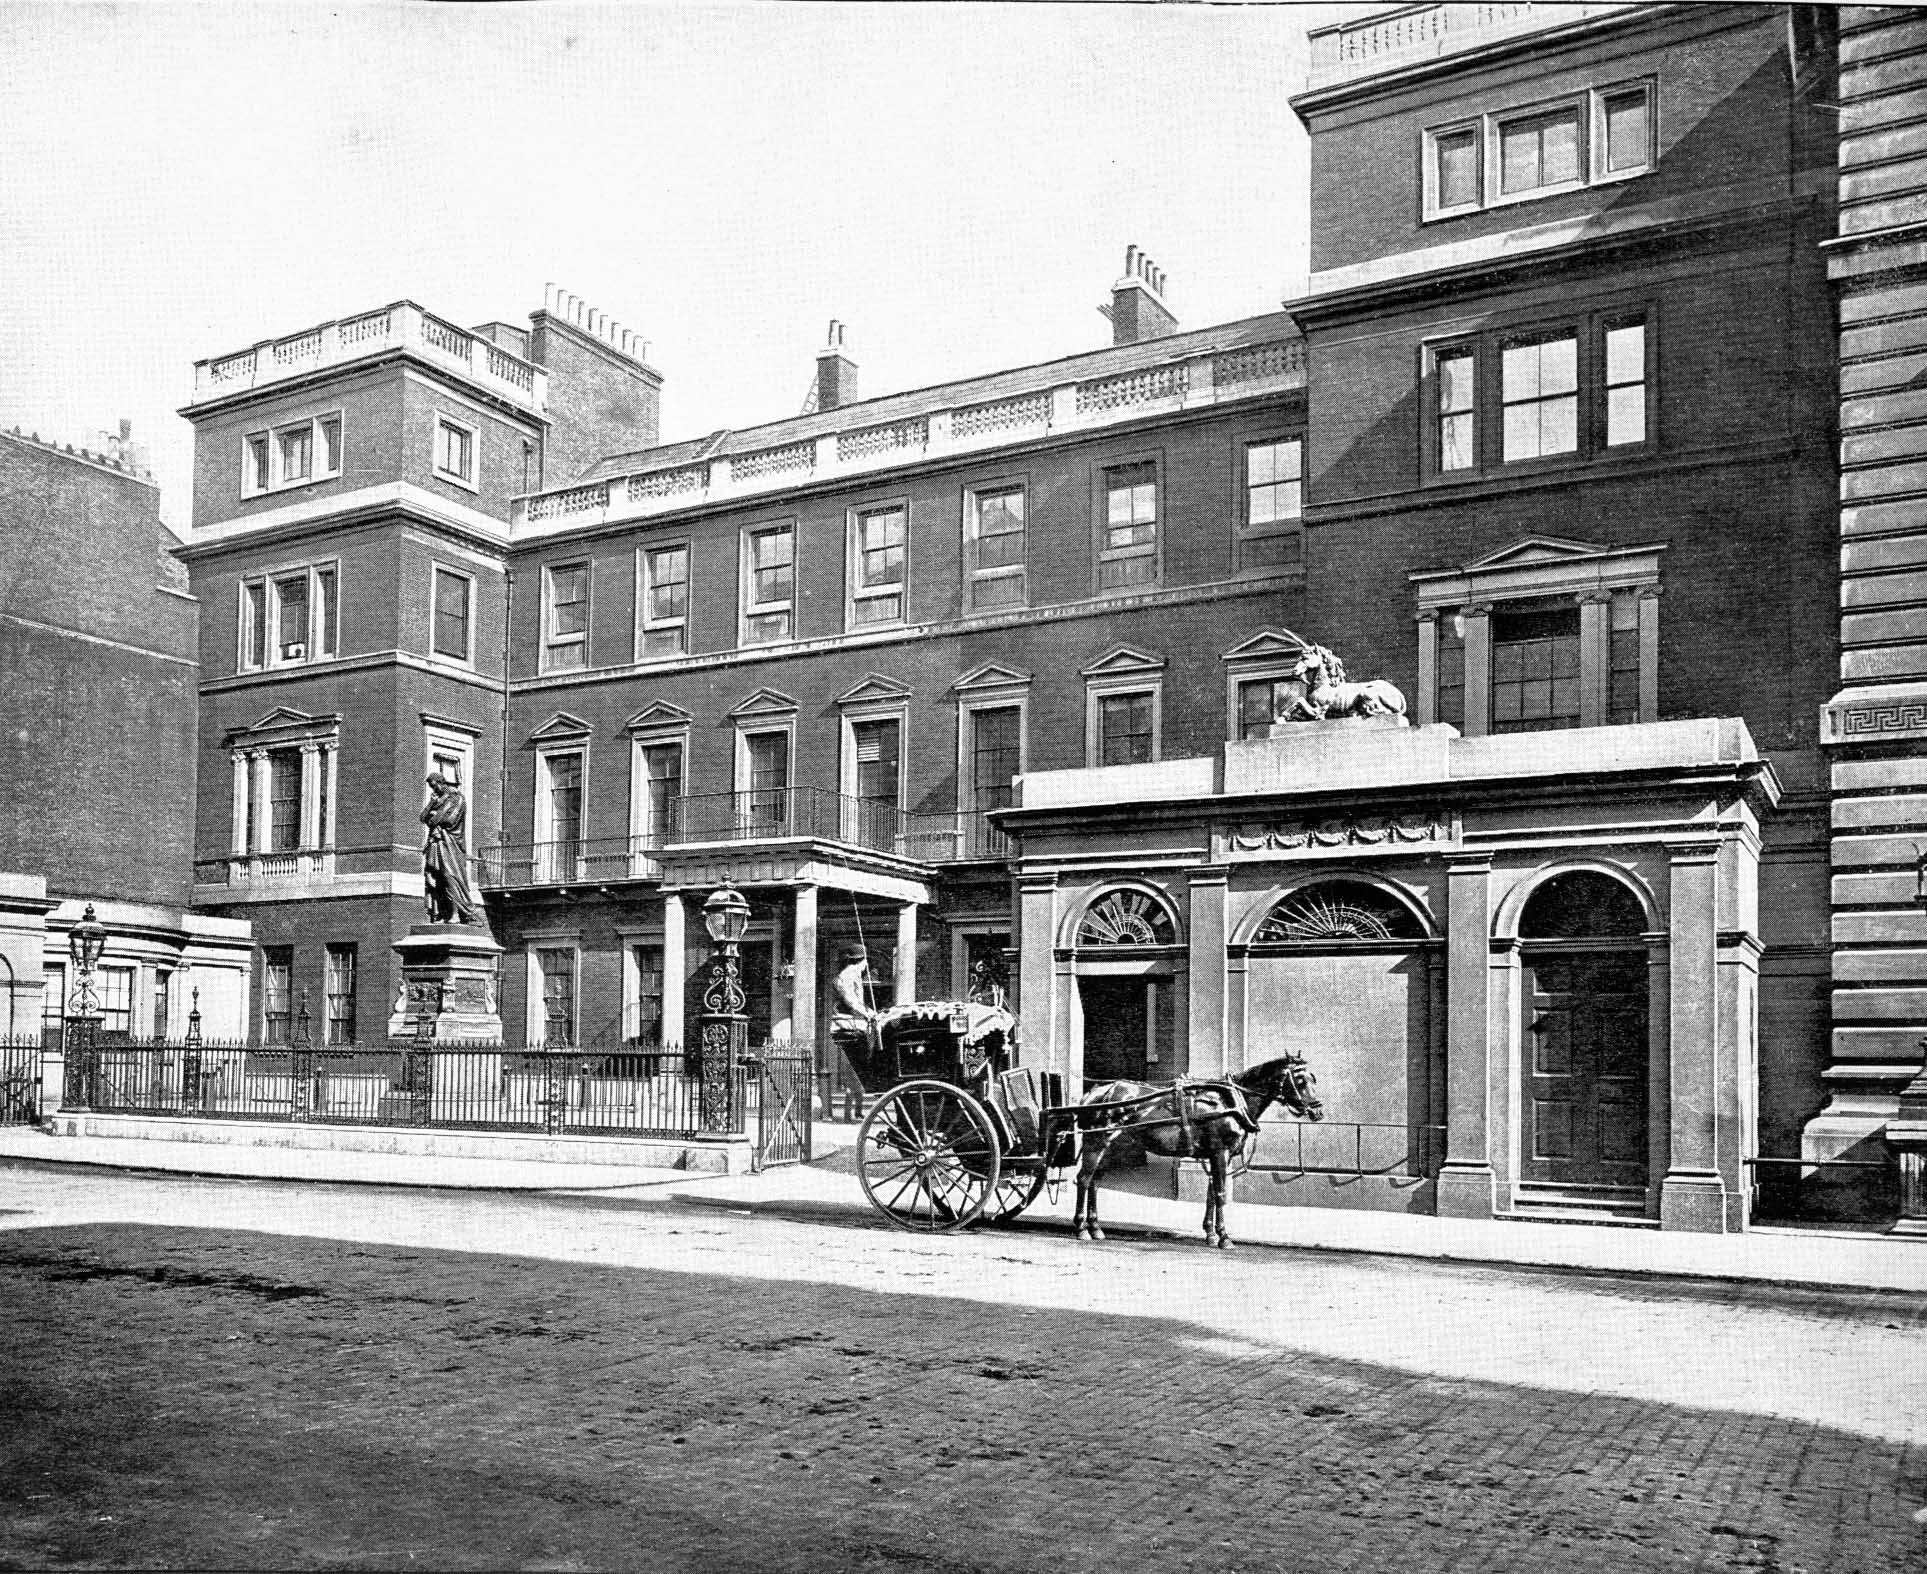  War Office, Pall Mall circa 1900. Used under Creative Commons by SA 2.0.